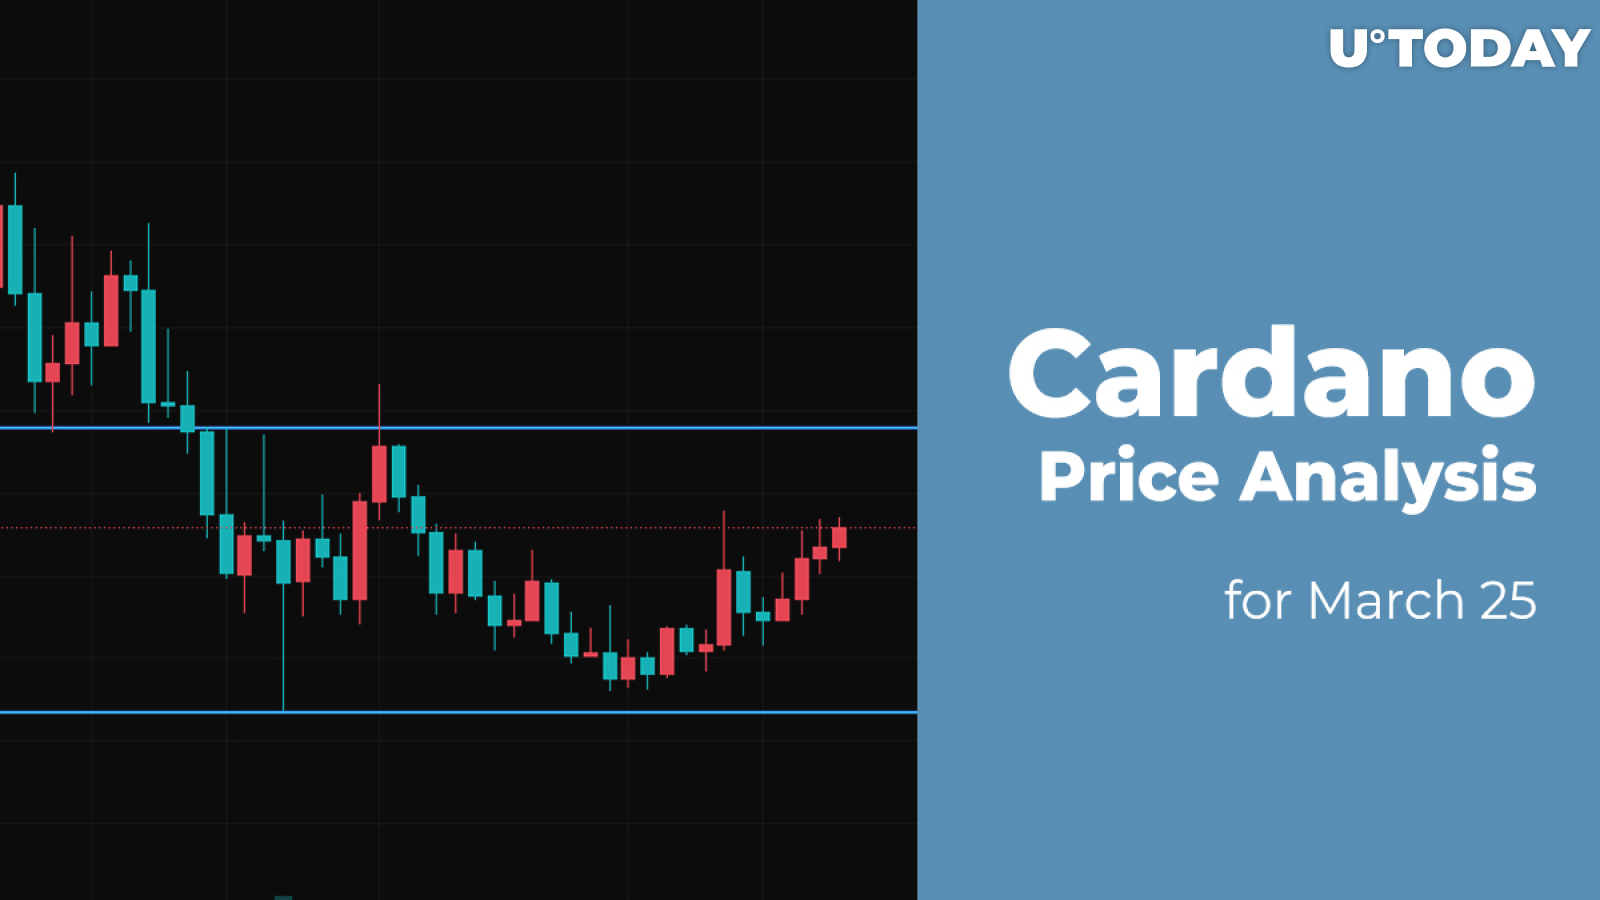 Cardano (ADA) Price Analysis for March 25